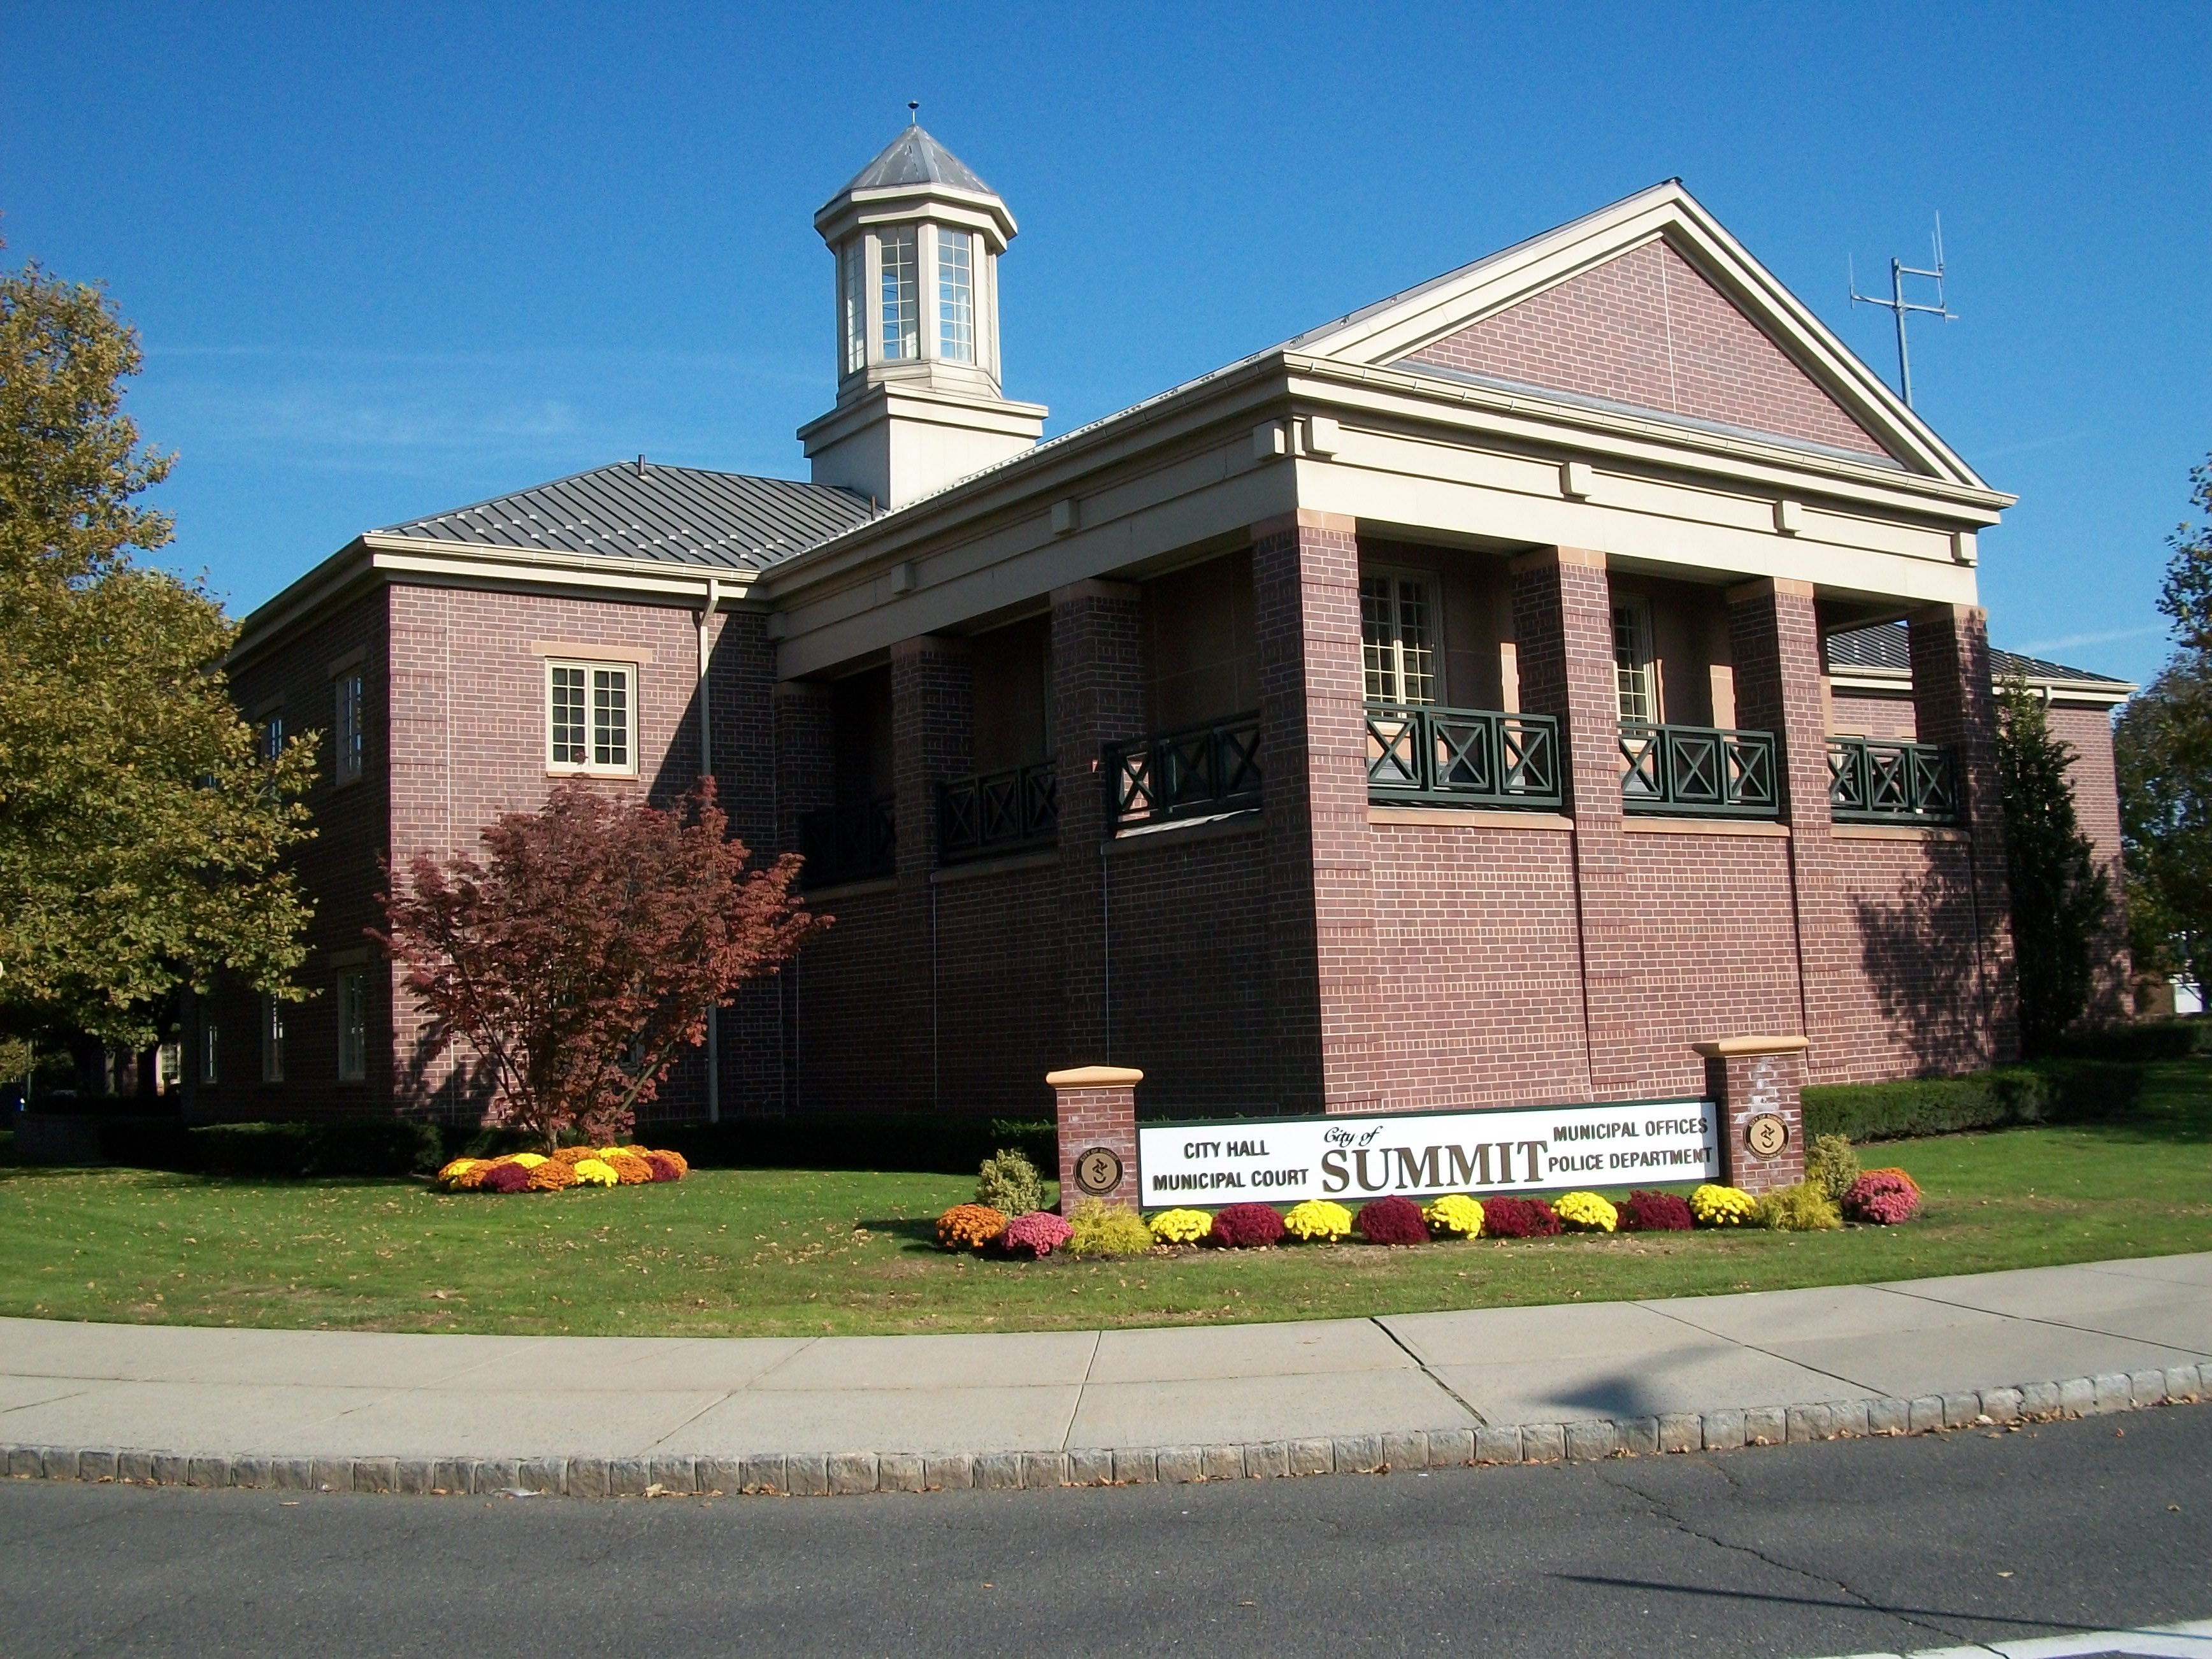 Photograph of City Hall and Municipal Court for Summit, NJ